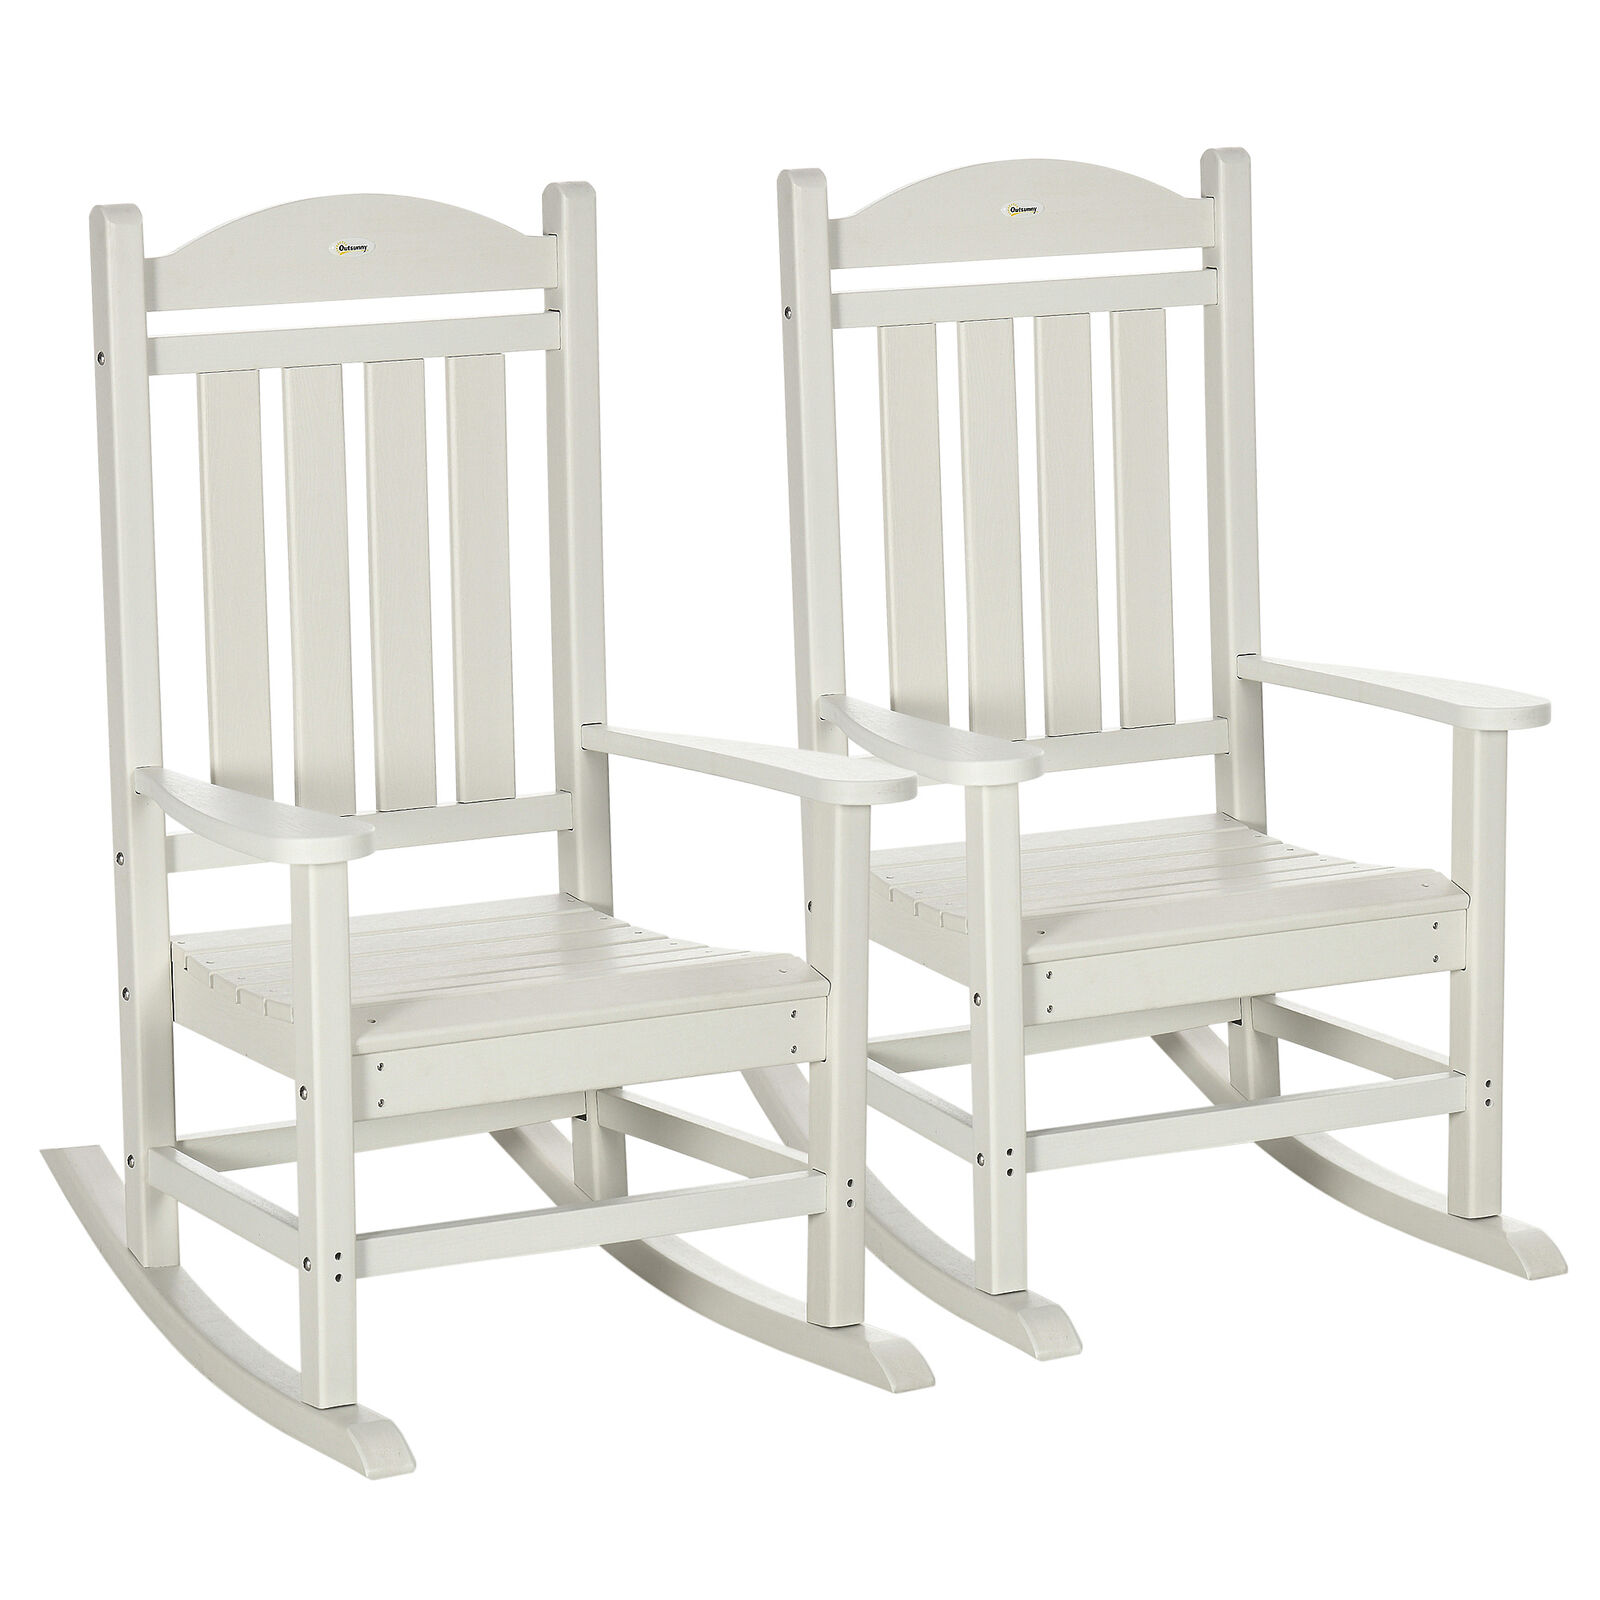 Outsunny Outdoor Rocking Chairs HDPE Slatted Design, Porch Rocker, White